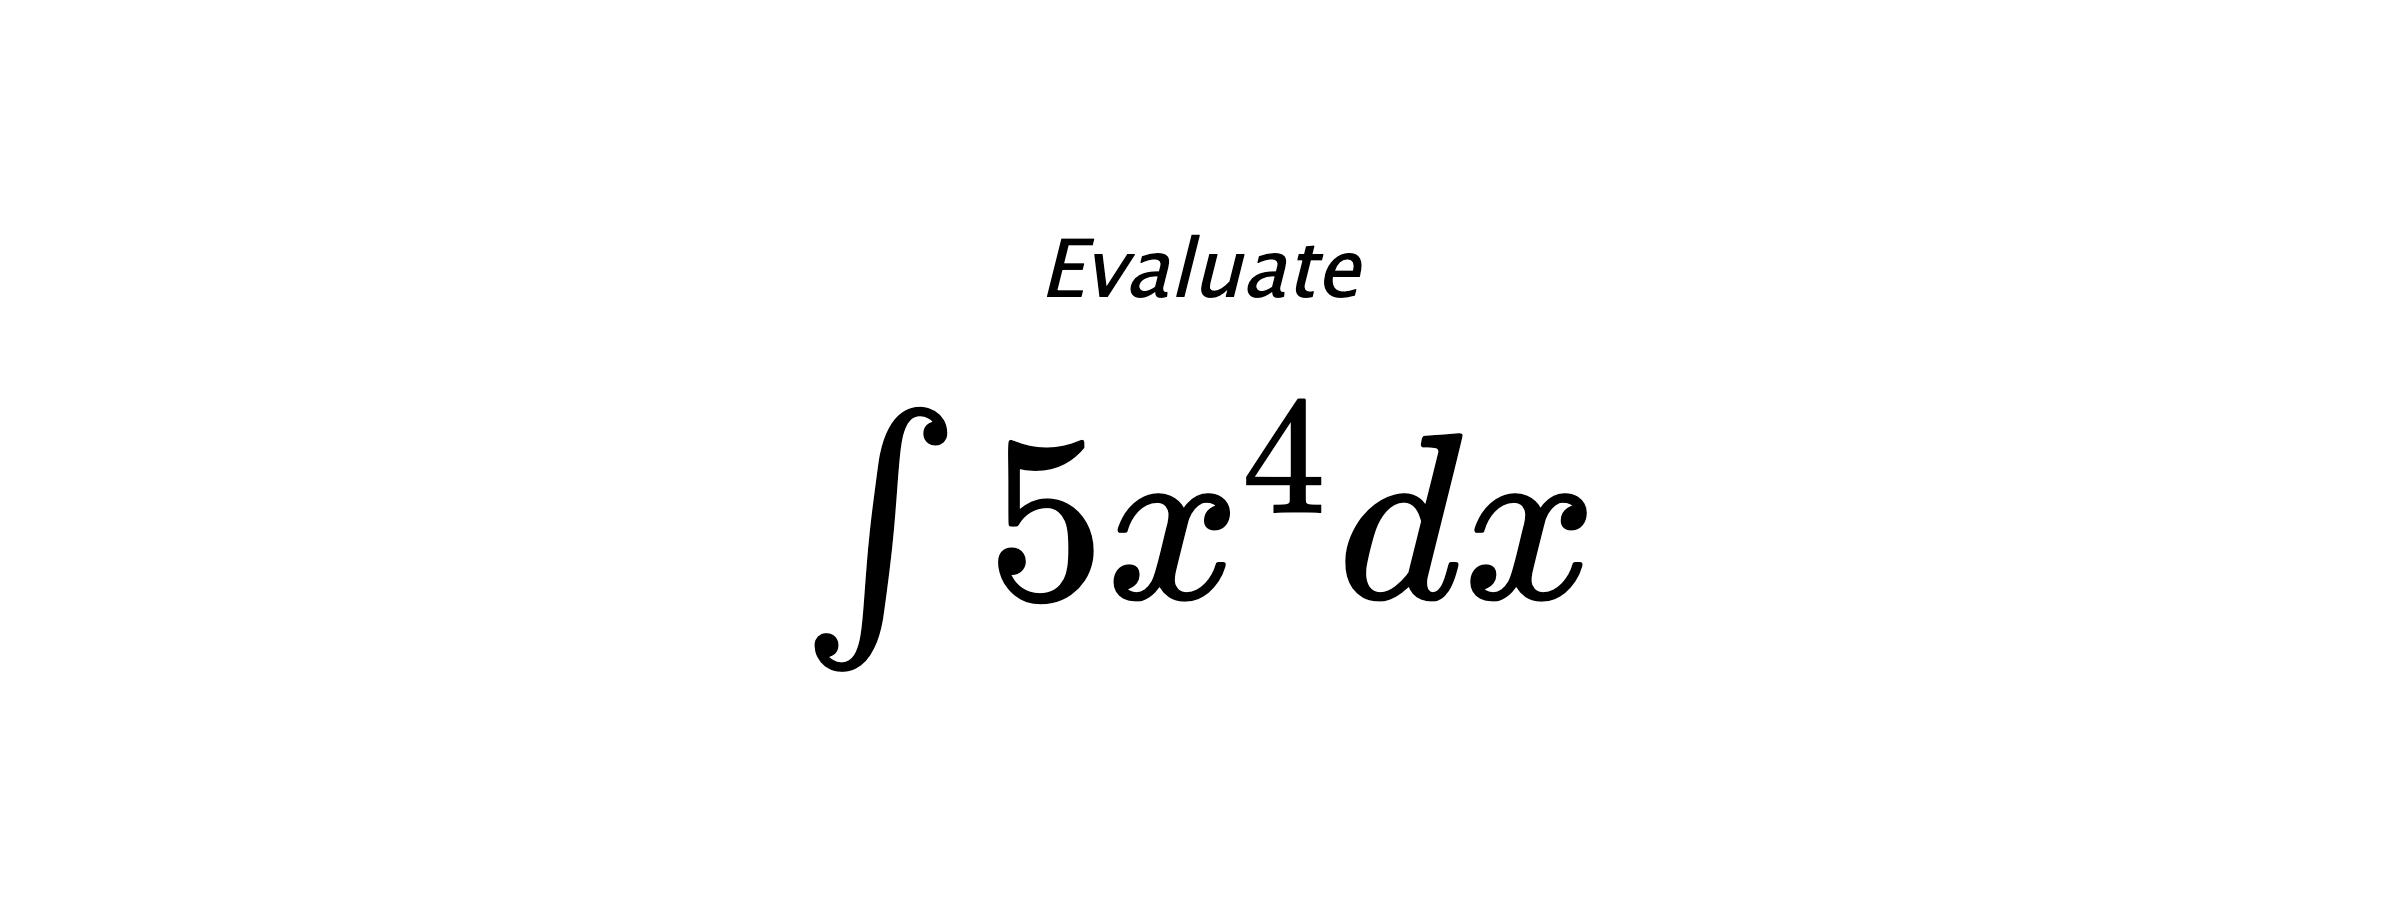 Evaluate $ \int 5 x^{4} dx $